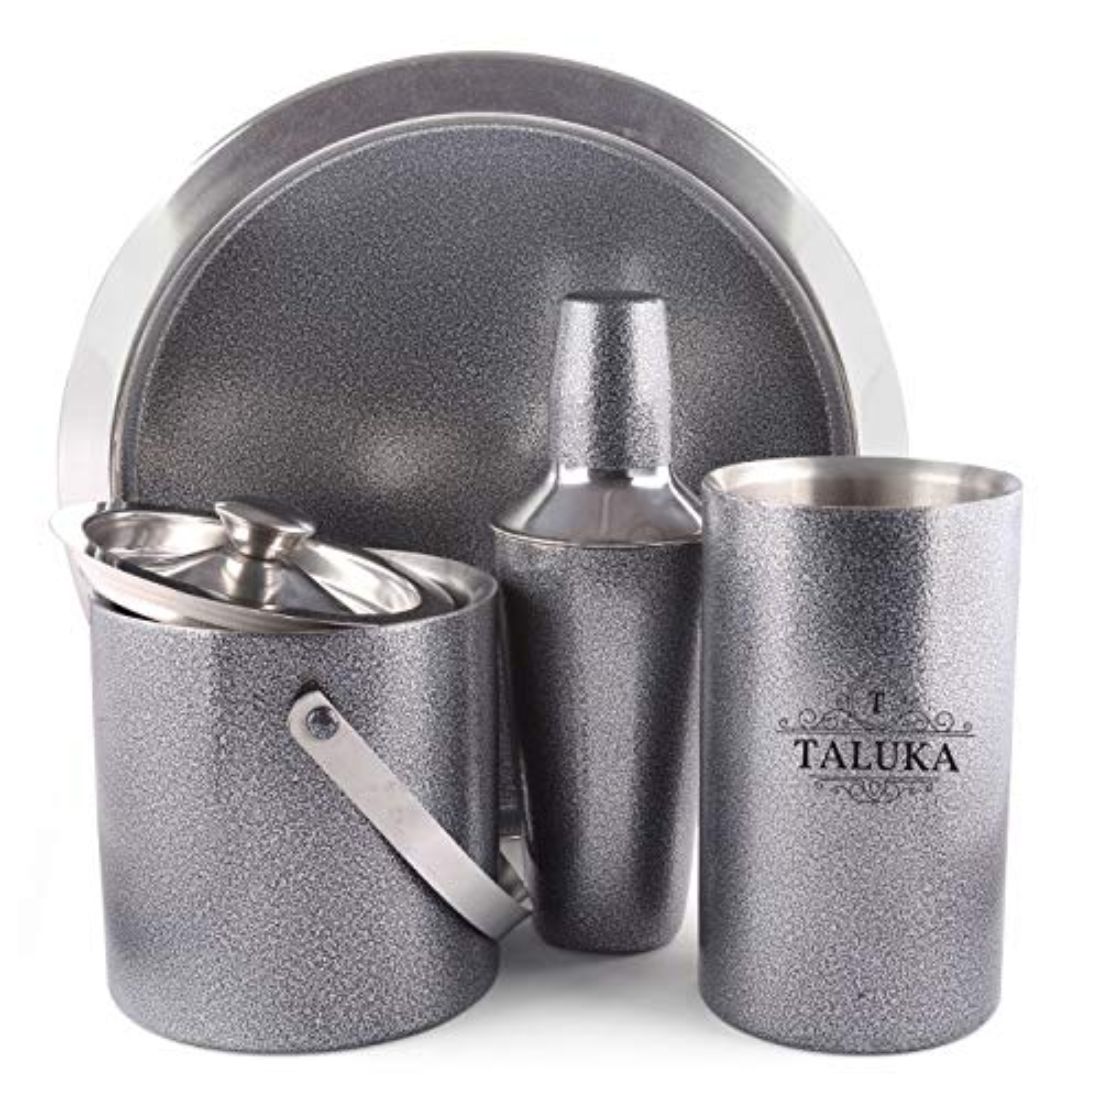 Exclusive Granite Finish Stainless Steel Cocktail 4 pcs Bar set | Cocktail shaker 750 ml | Ice Bucket Double Wall | Wine Cooler | Tray For Home Hotel Restaurant